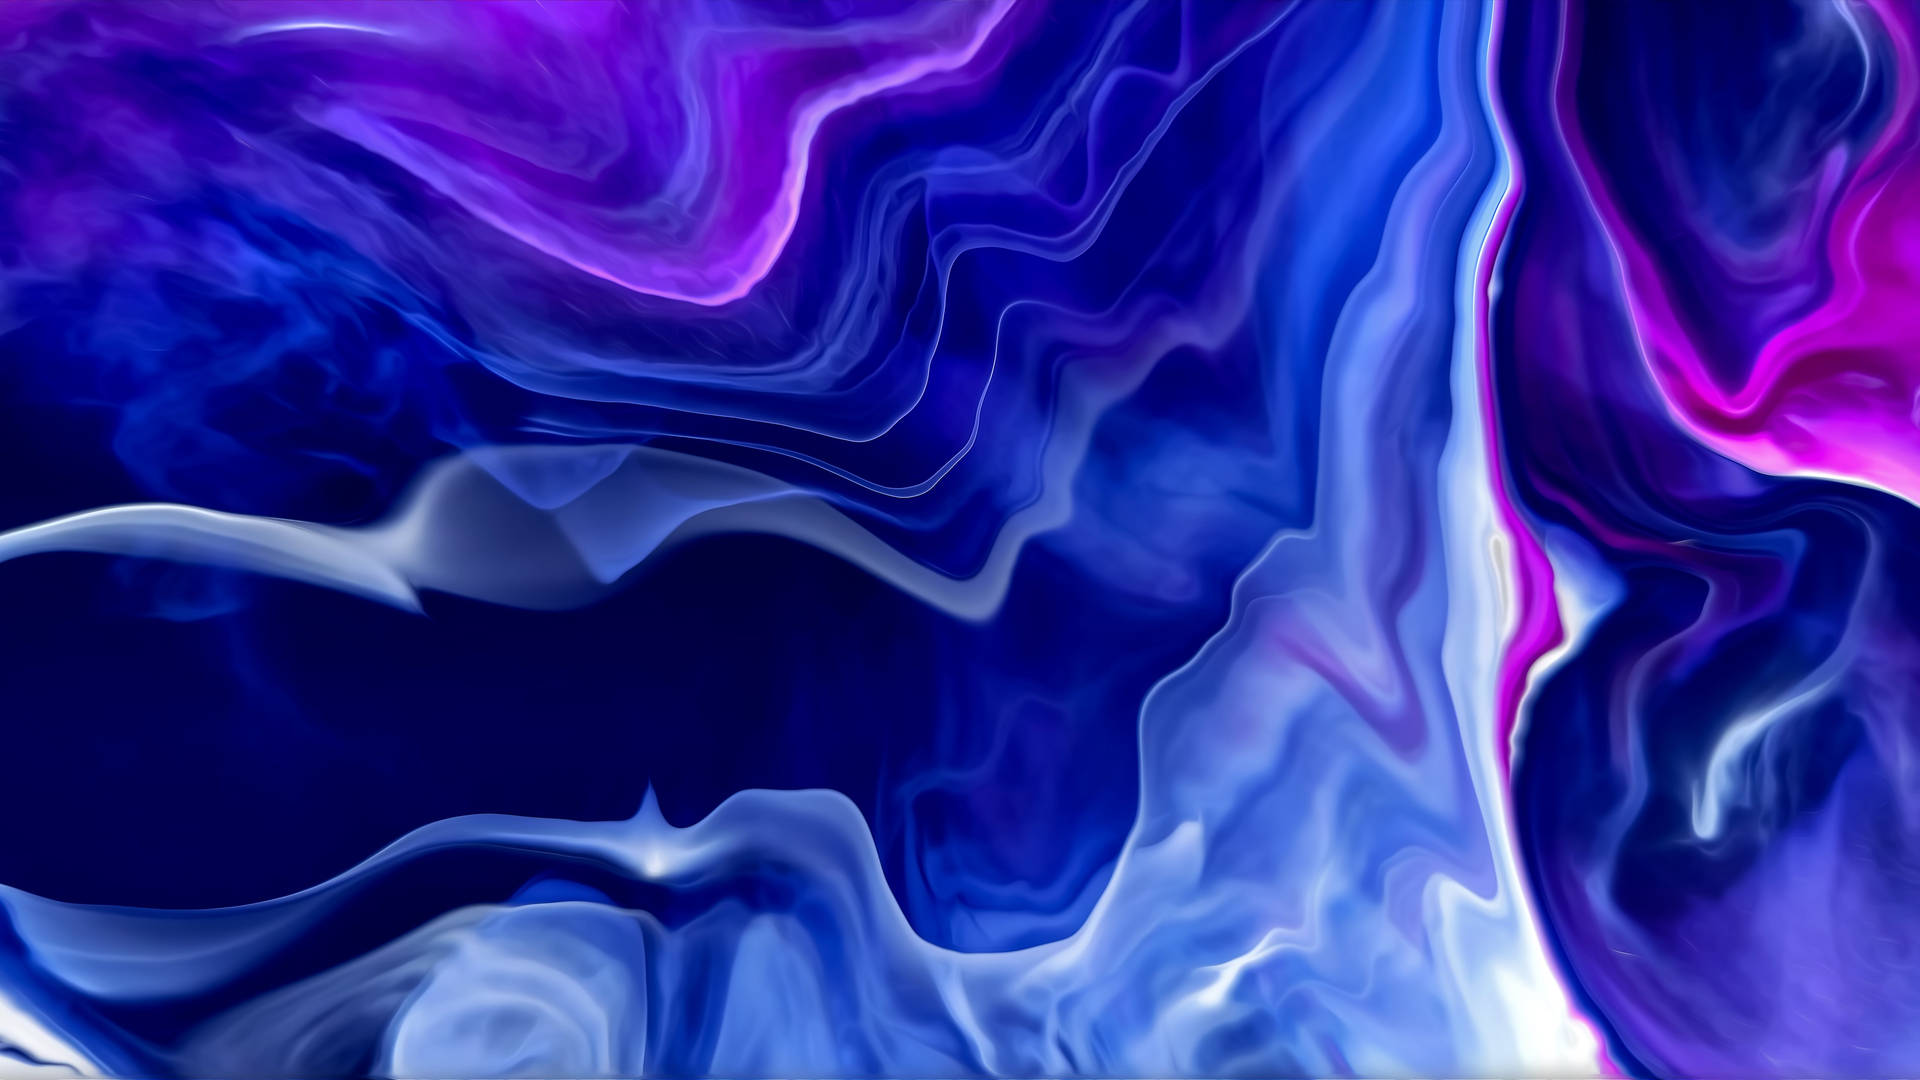 Blue And Pink Liquid Surface Imac 4k